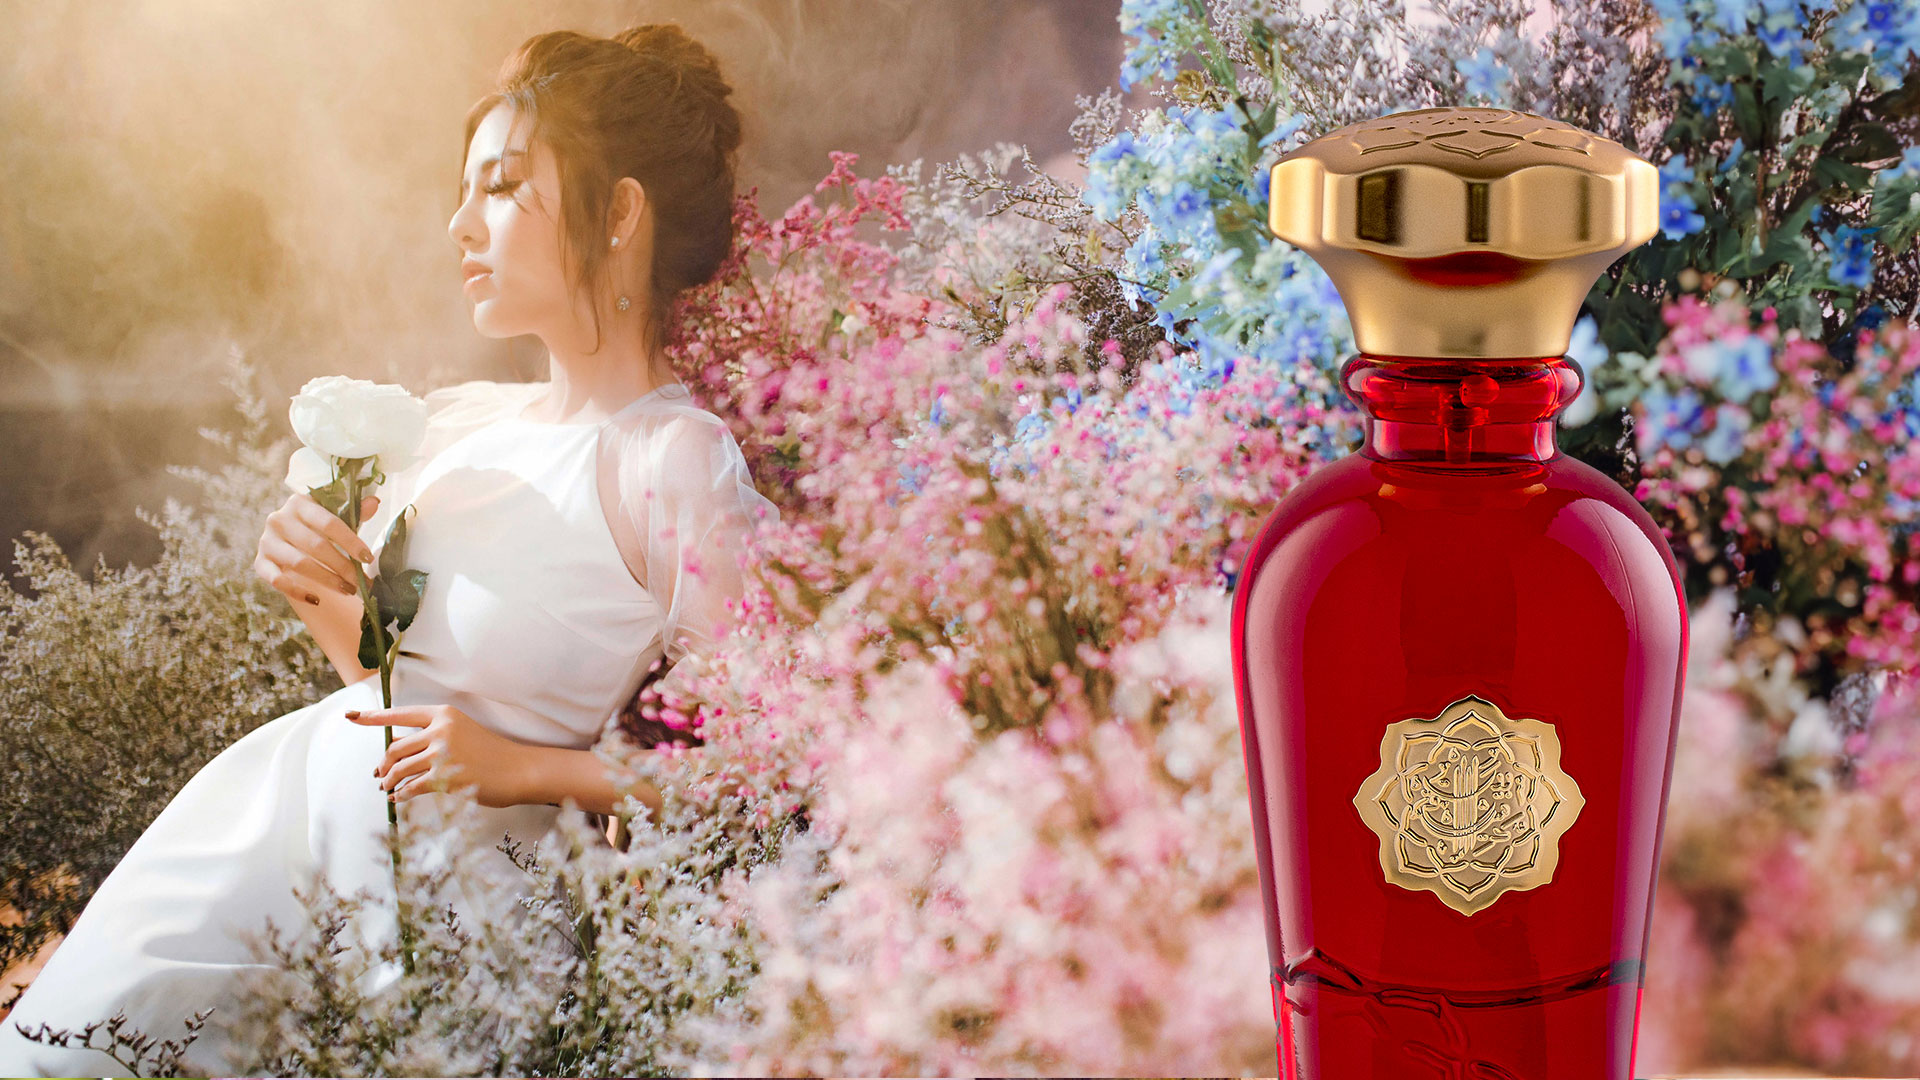 Scent That Lasts: Discover the Long-Lasting Allure of Sweet Fragrances ​